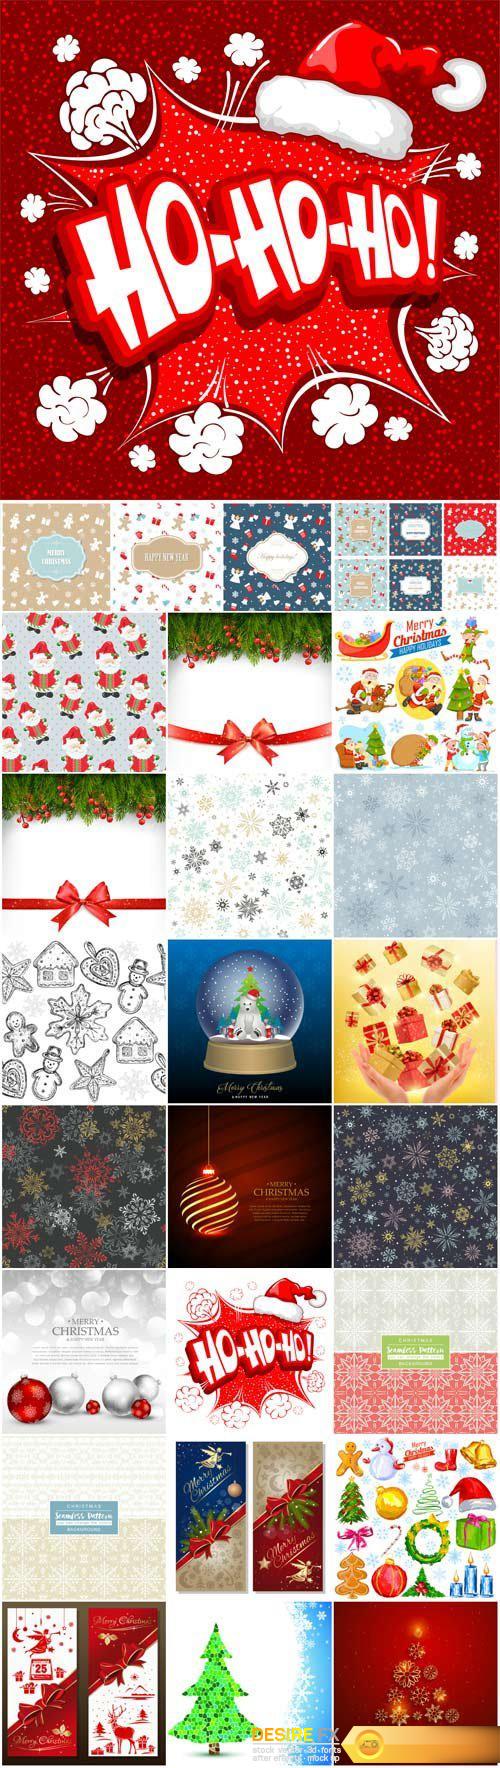 Merry Christmas and Happy New Year vector, backgrounds and textures